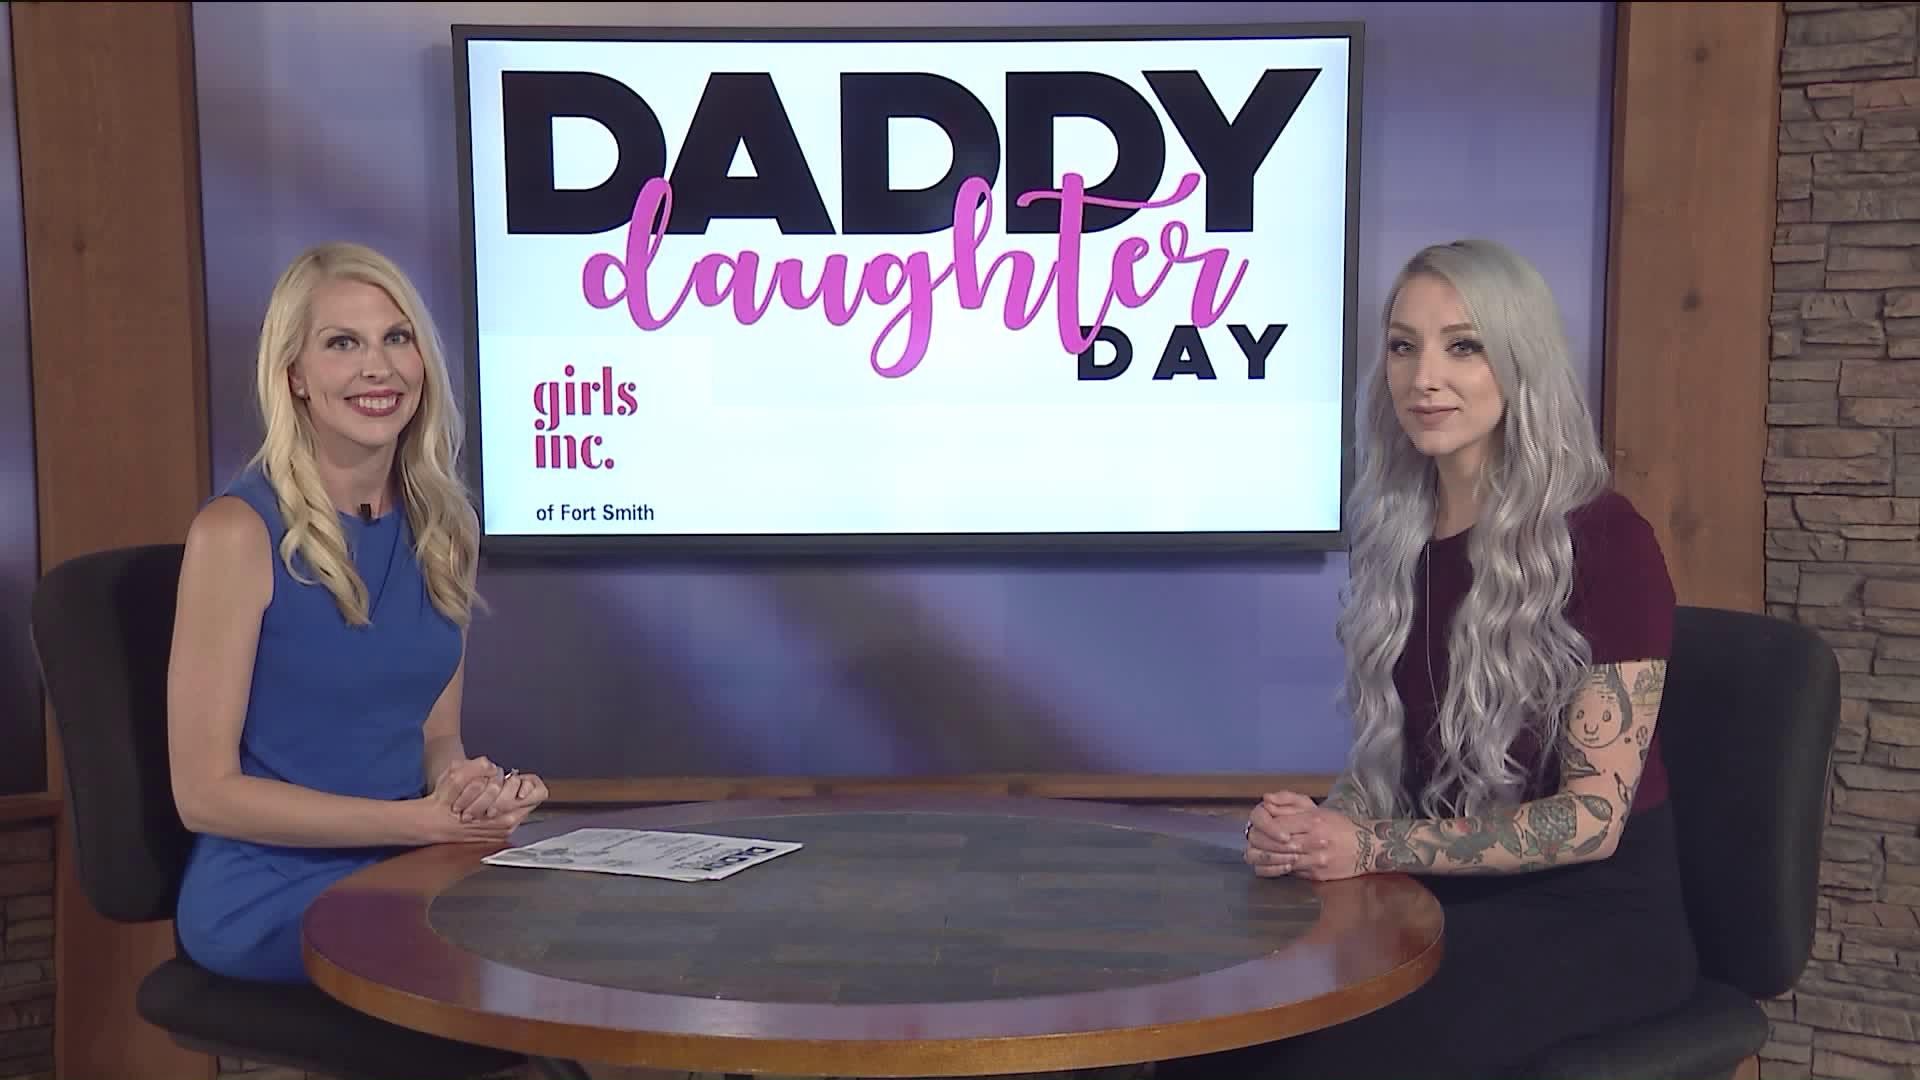 Daddy Daughter Day